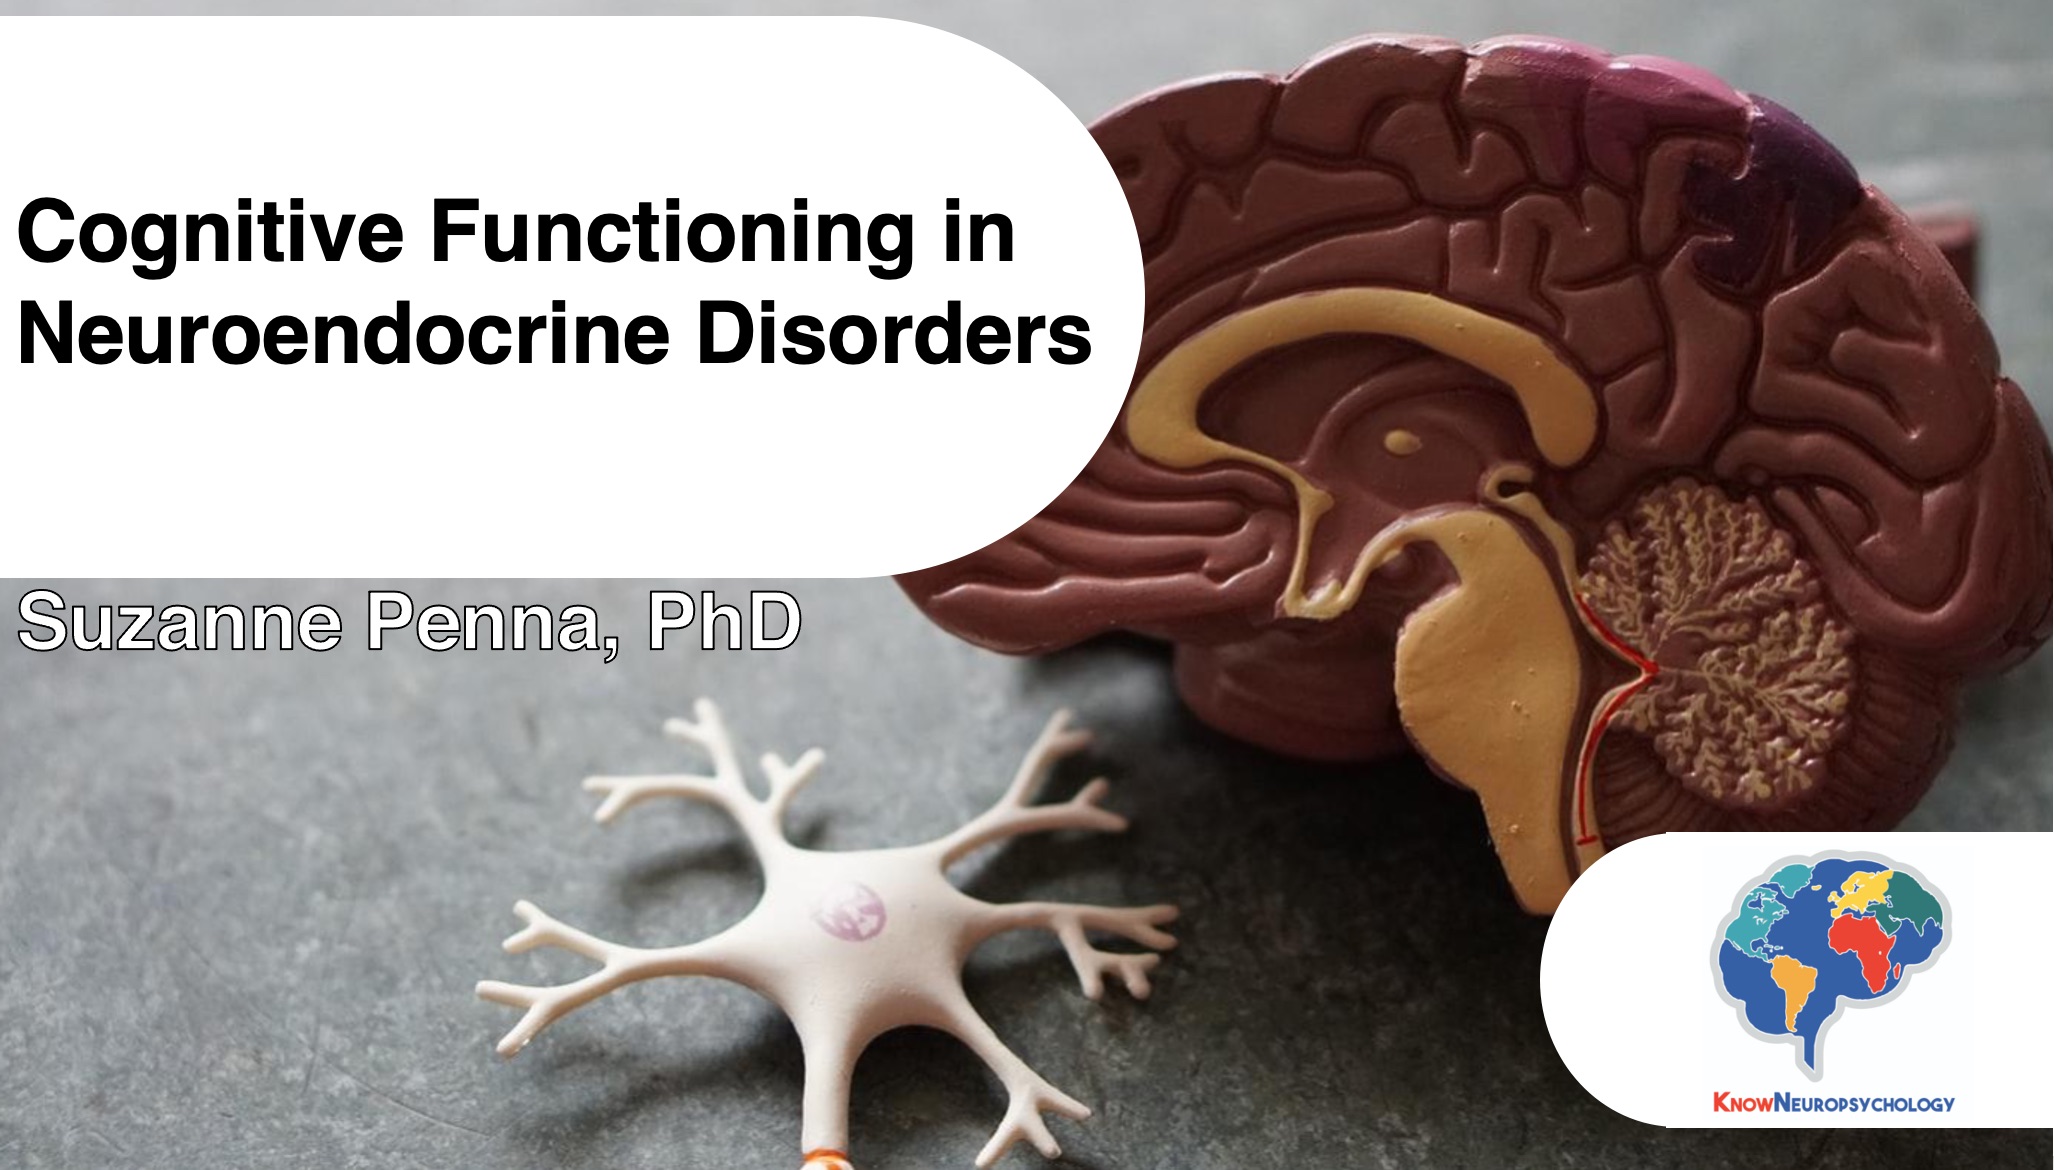 Cognitive Functioning in Neuroendocrine Disorders with Dr. Suzanne Penna